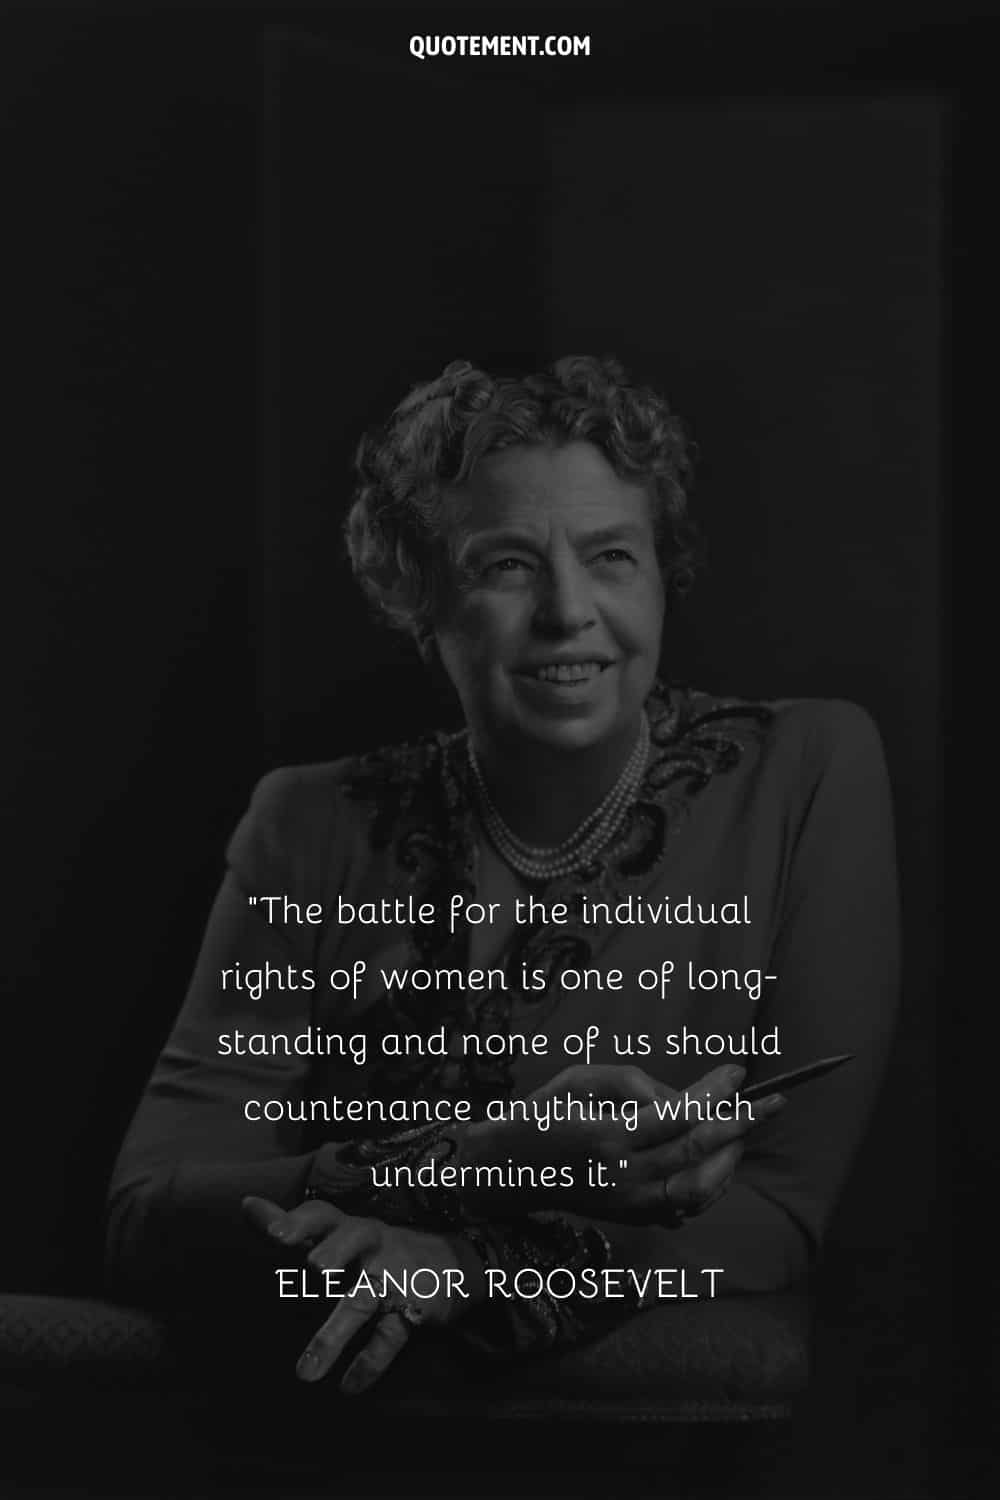 The battle for the individual rights of women is one of long-standing and none of us should countenance anything which undermines it. — Eleanor Roosevelt